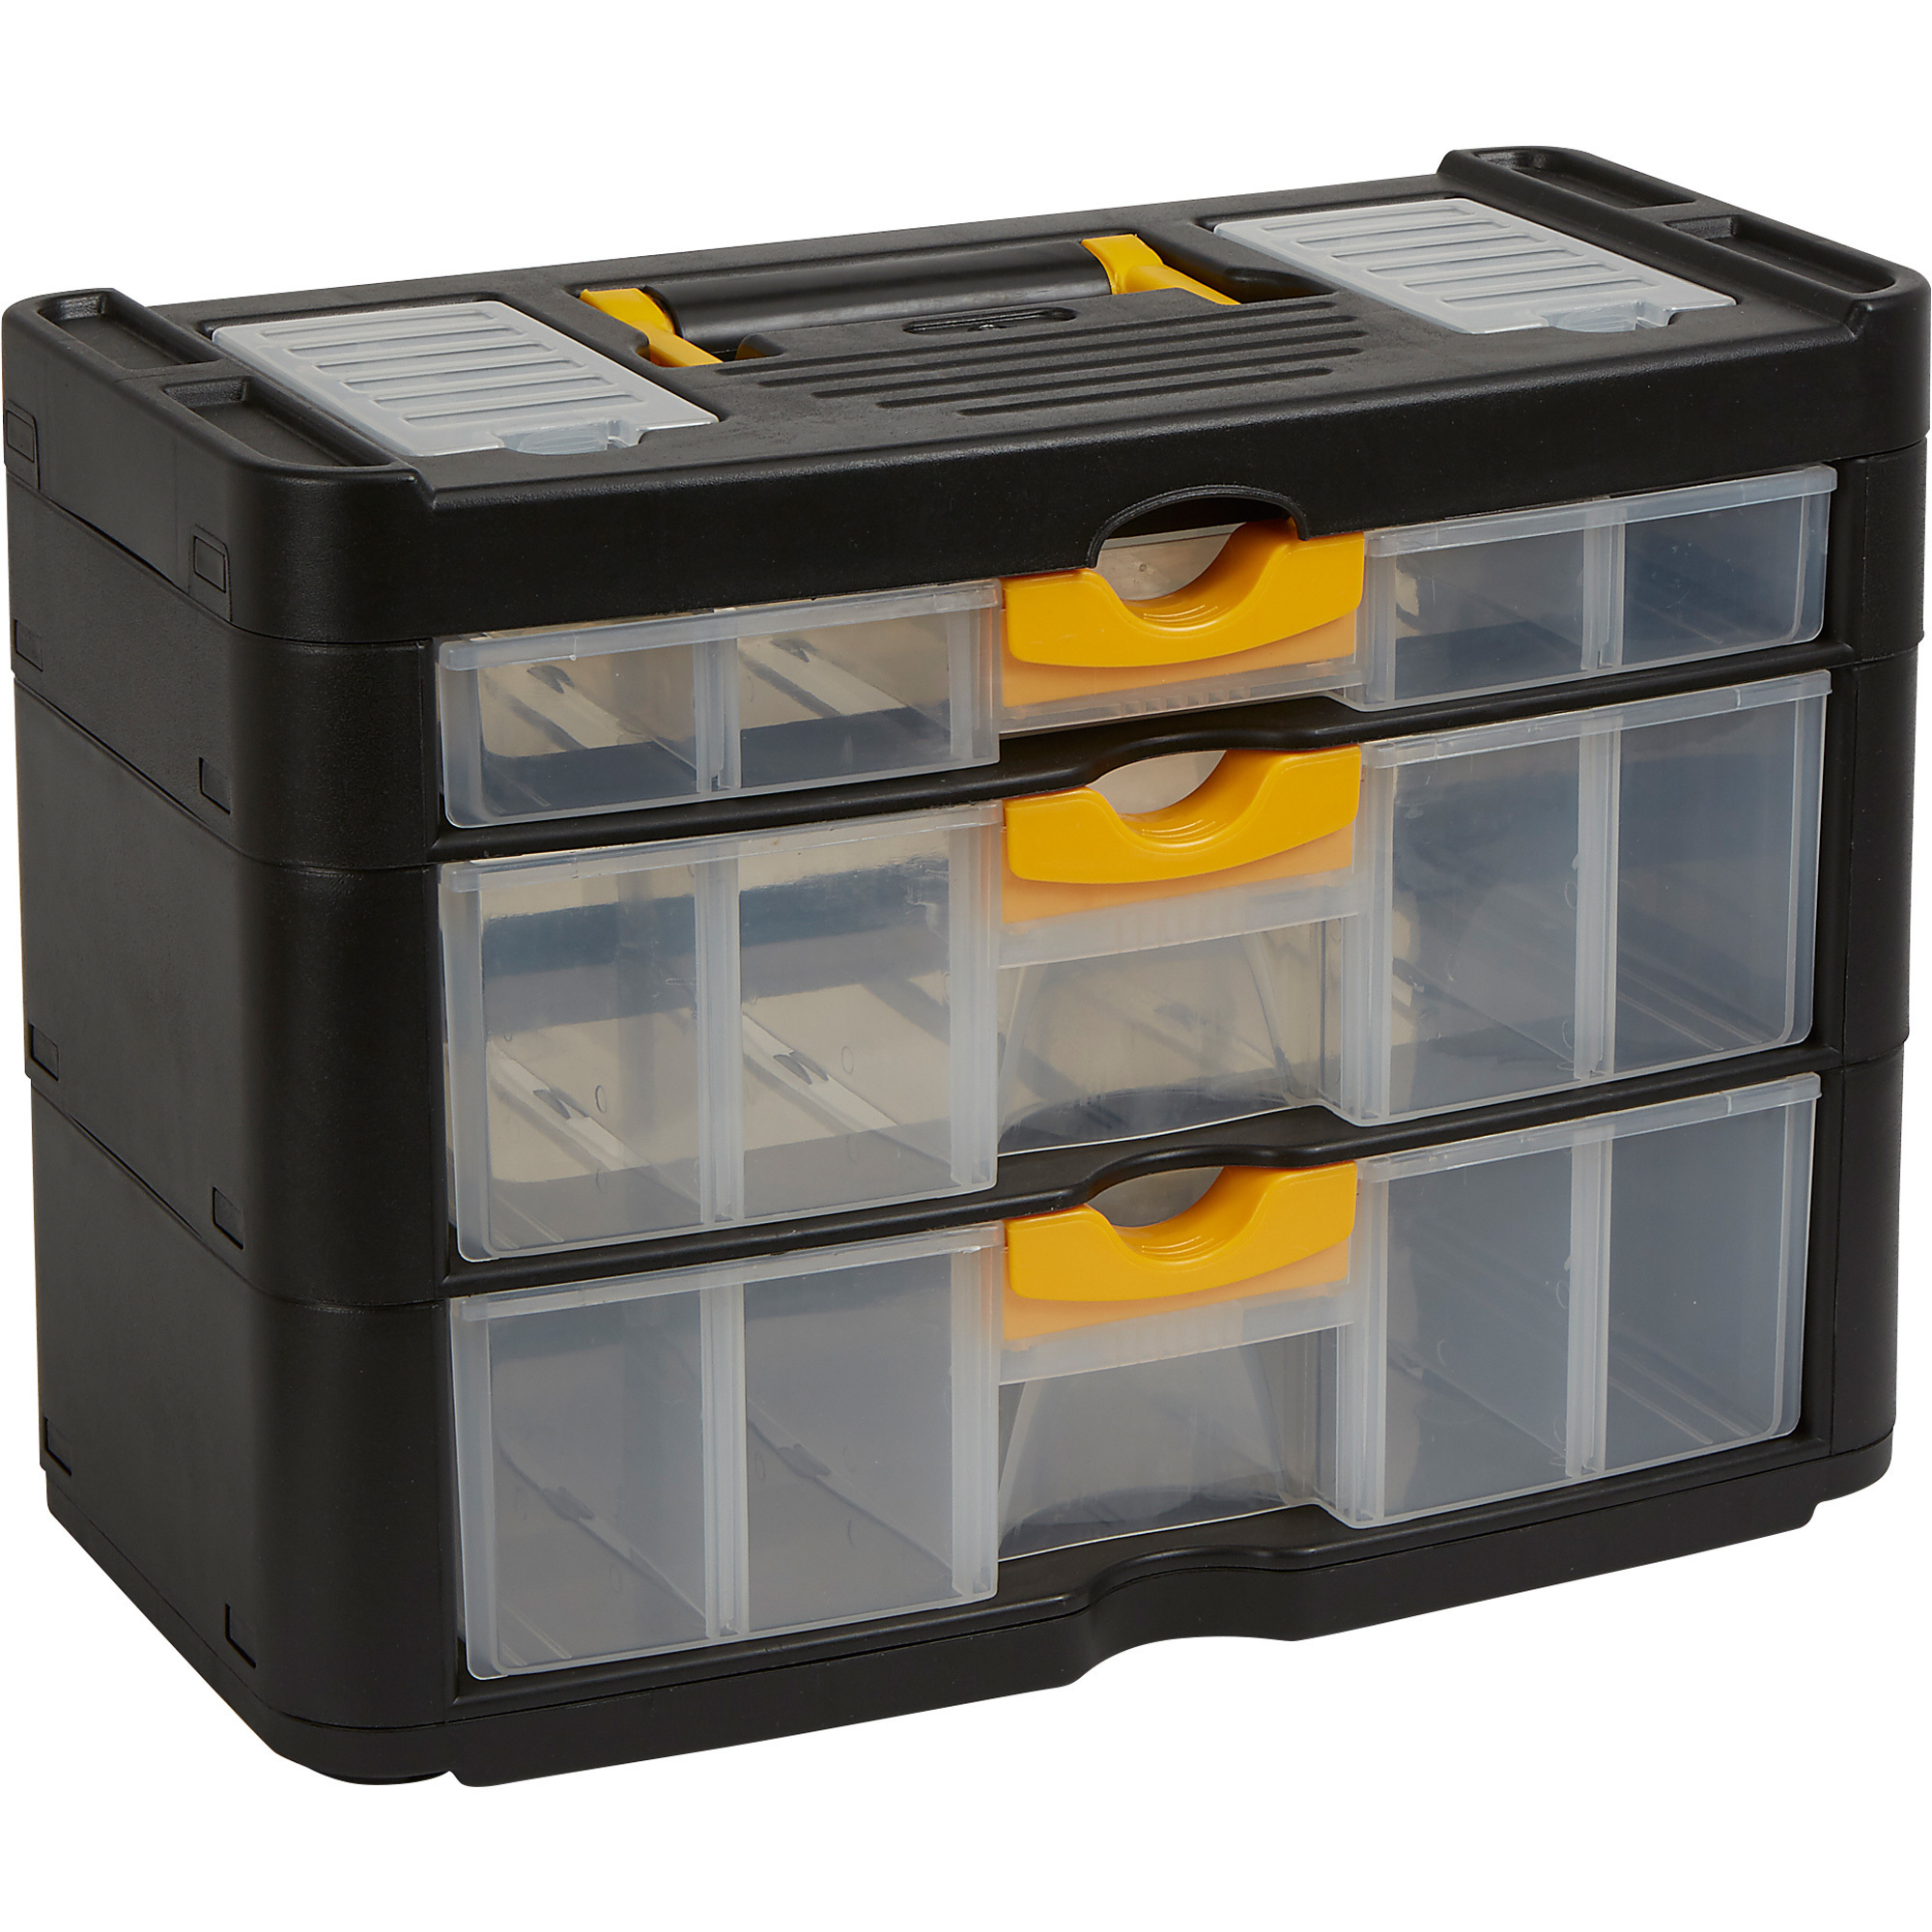 X-Space 4-Drawer Portable Storage Box, 15 11/16in.W x 7 11/16in.D x 11  7/32in.H